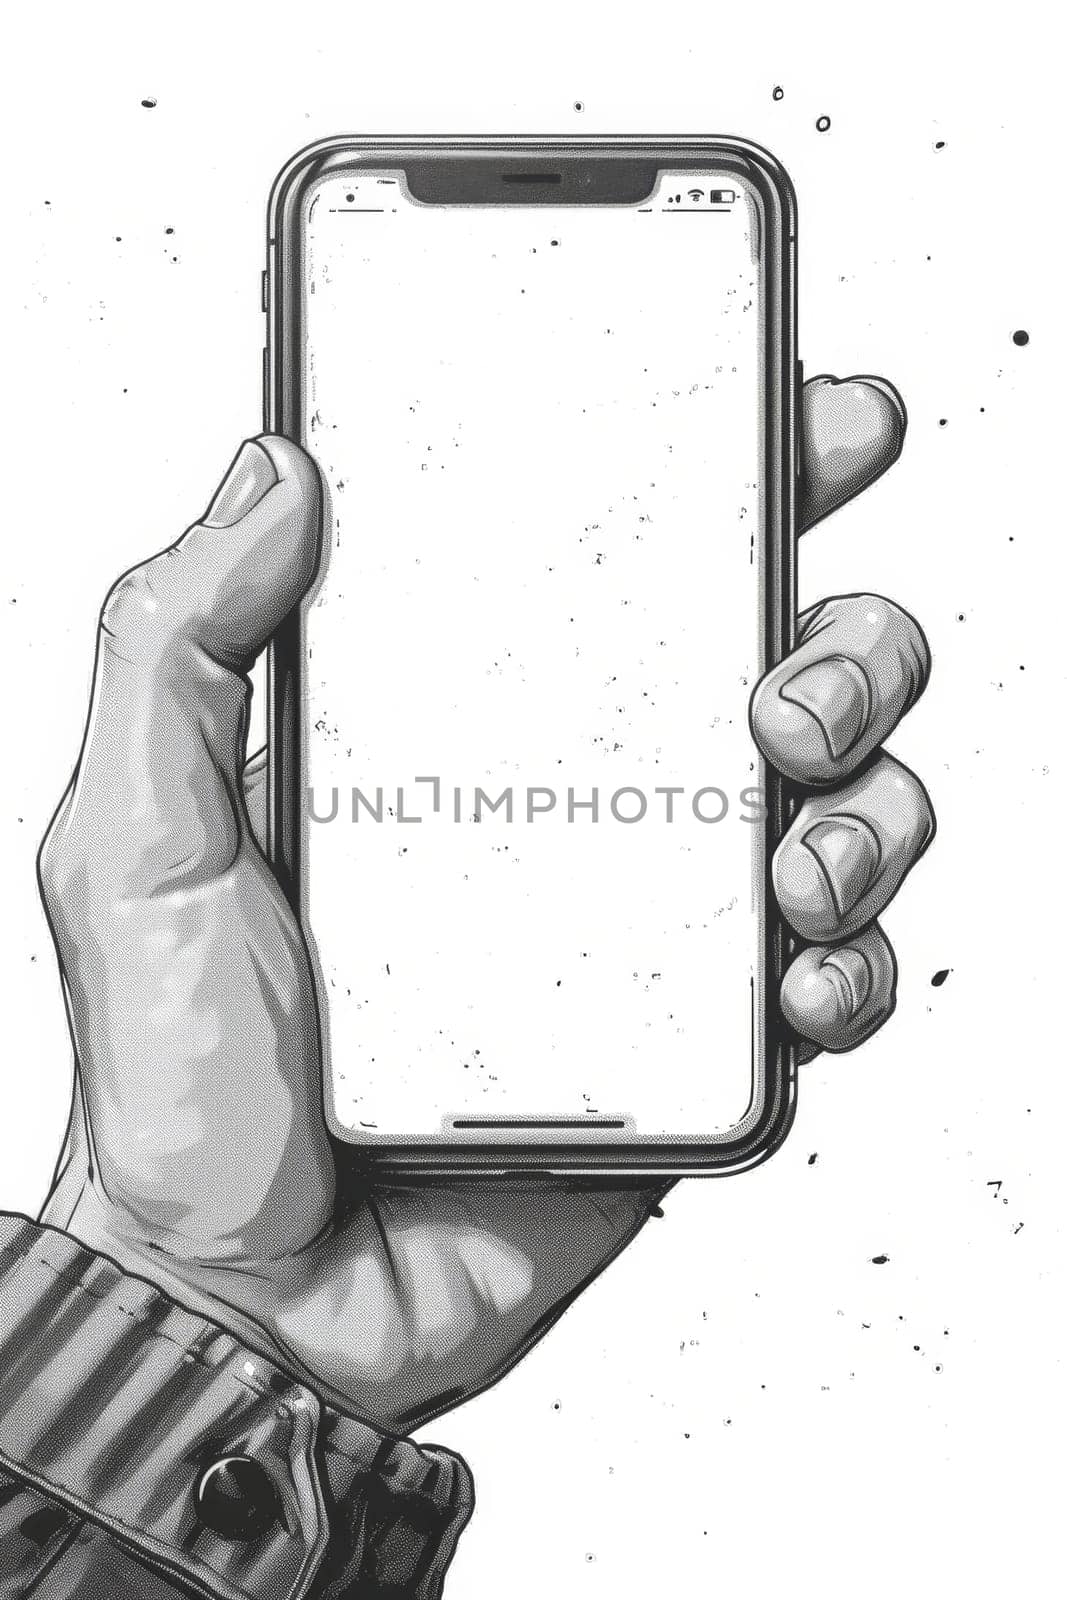 A man's hand holding a black smartphone with a blank screen highlighted on a white background. Illustration